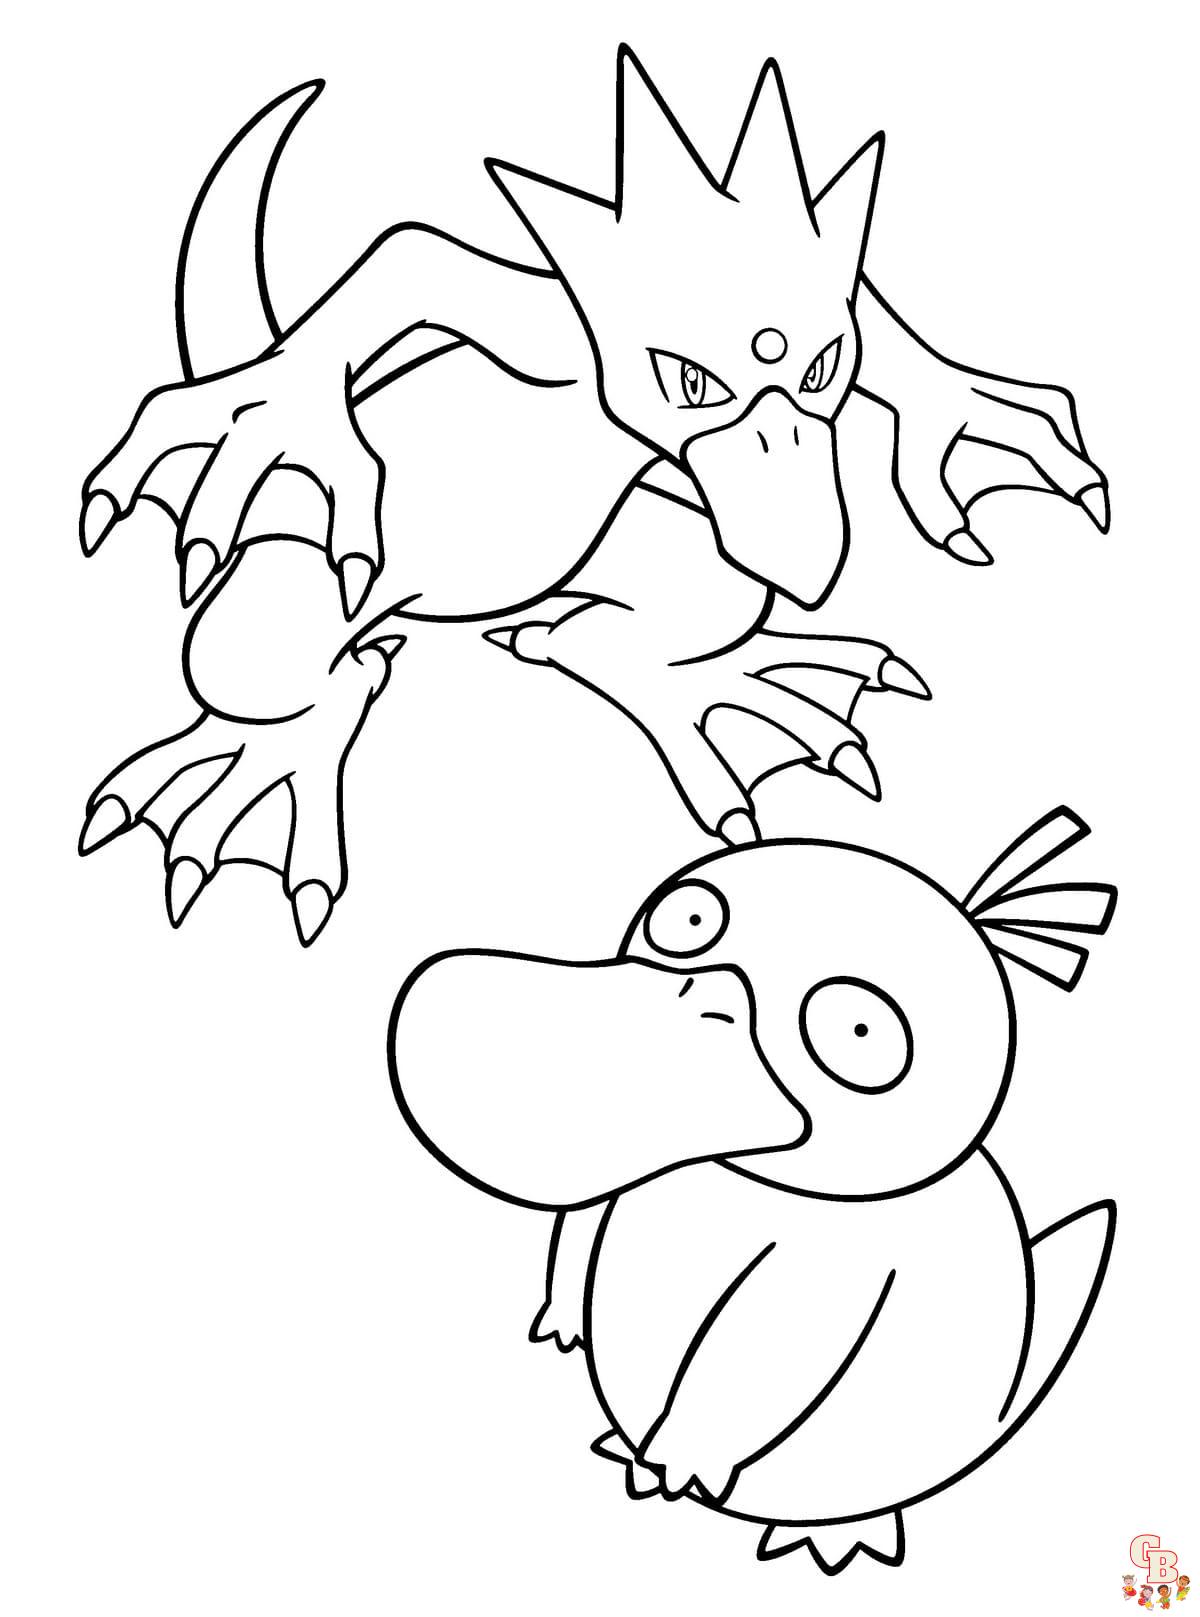 Enjoy Coloring Golduck Coloring Pages - Printable, Free & Easy